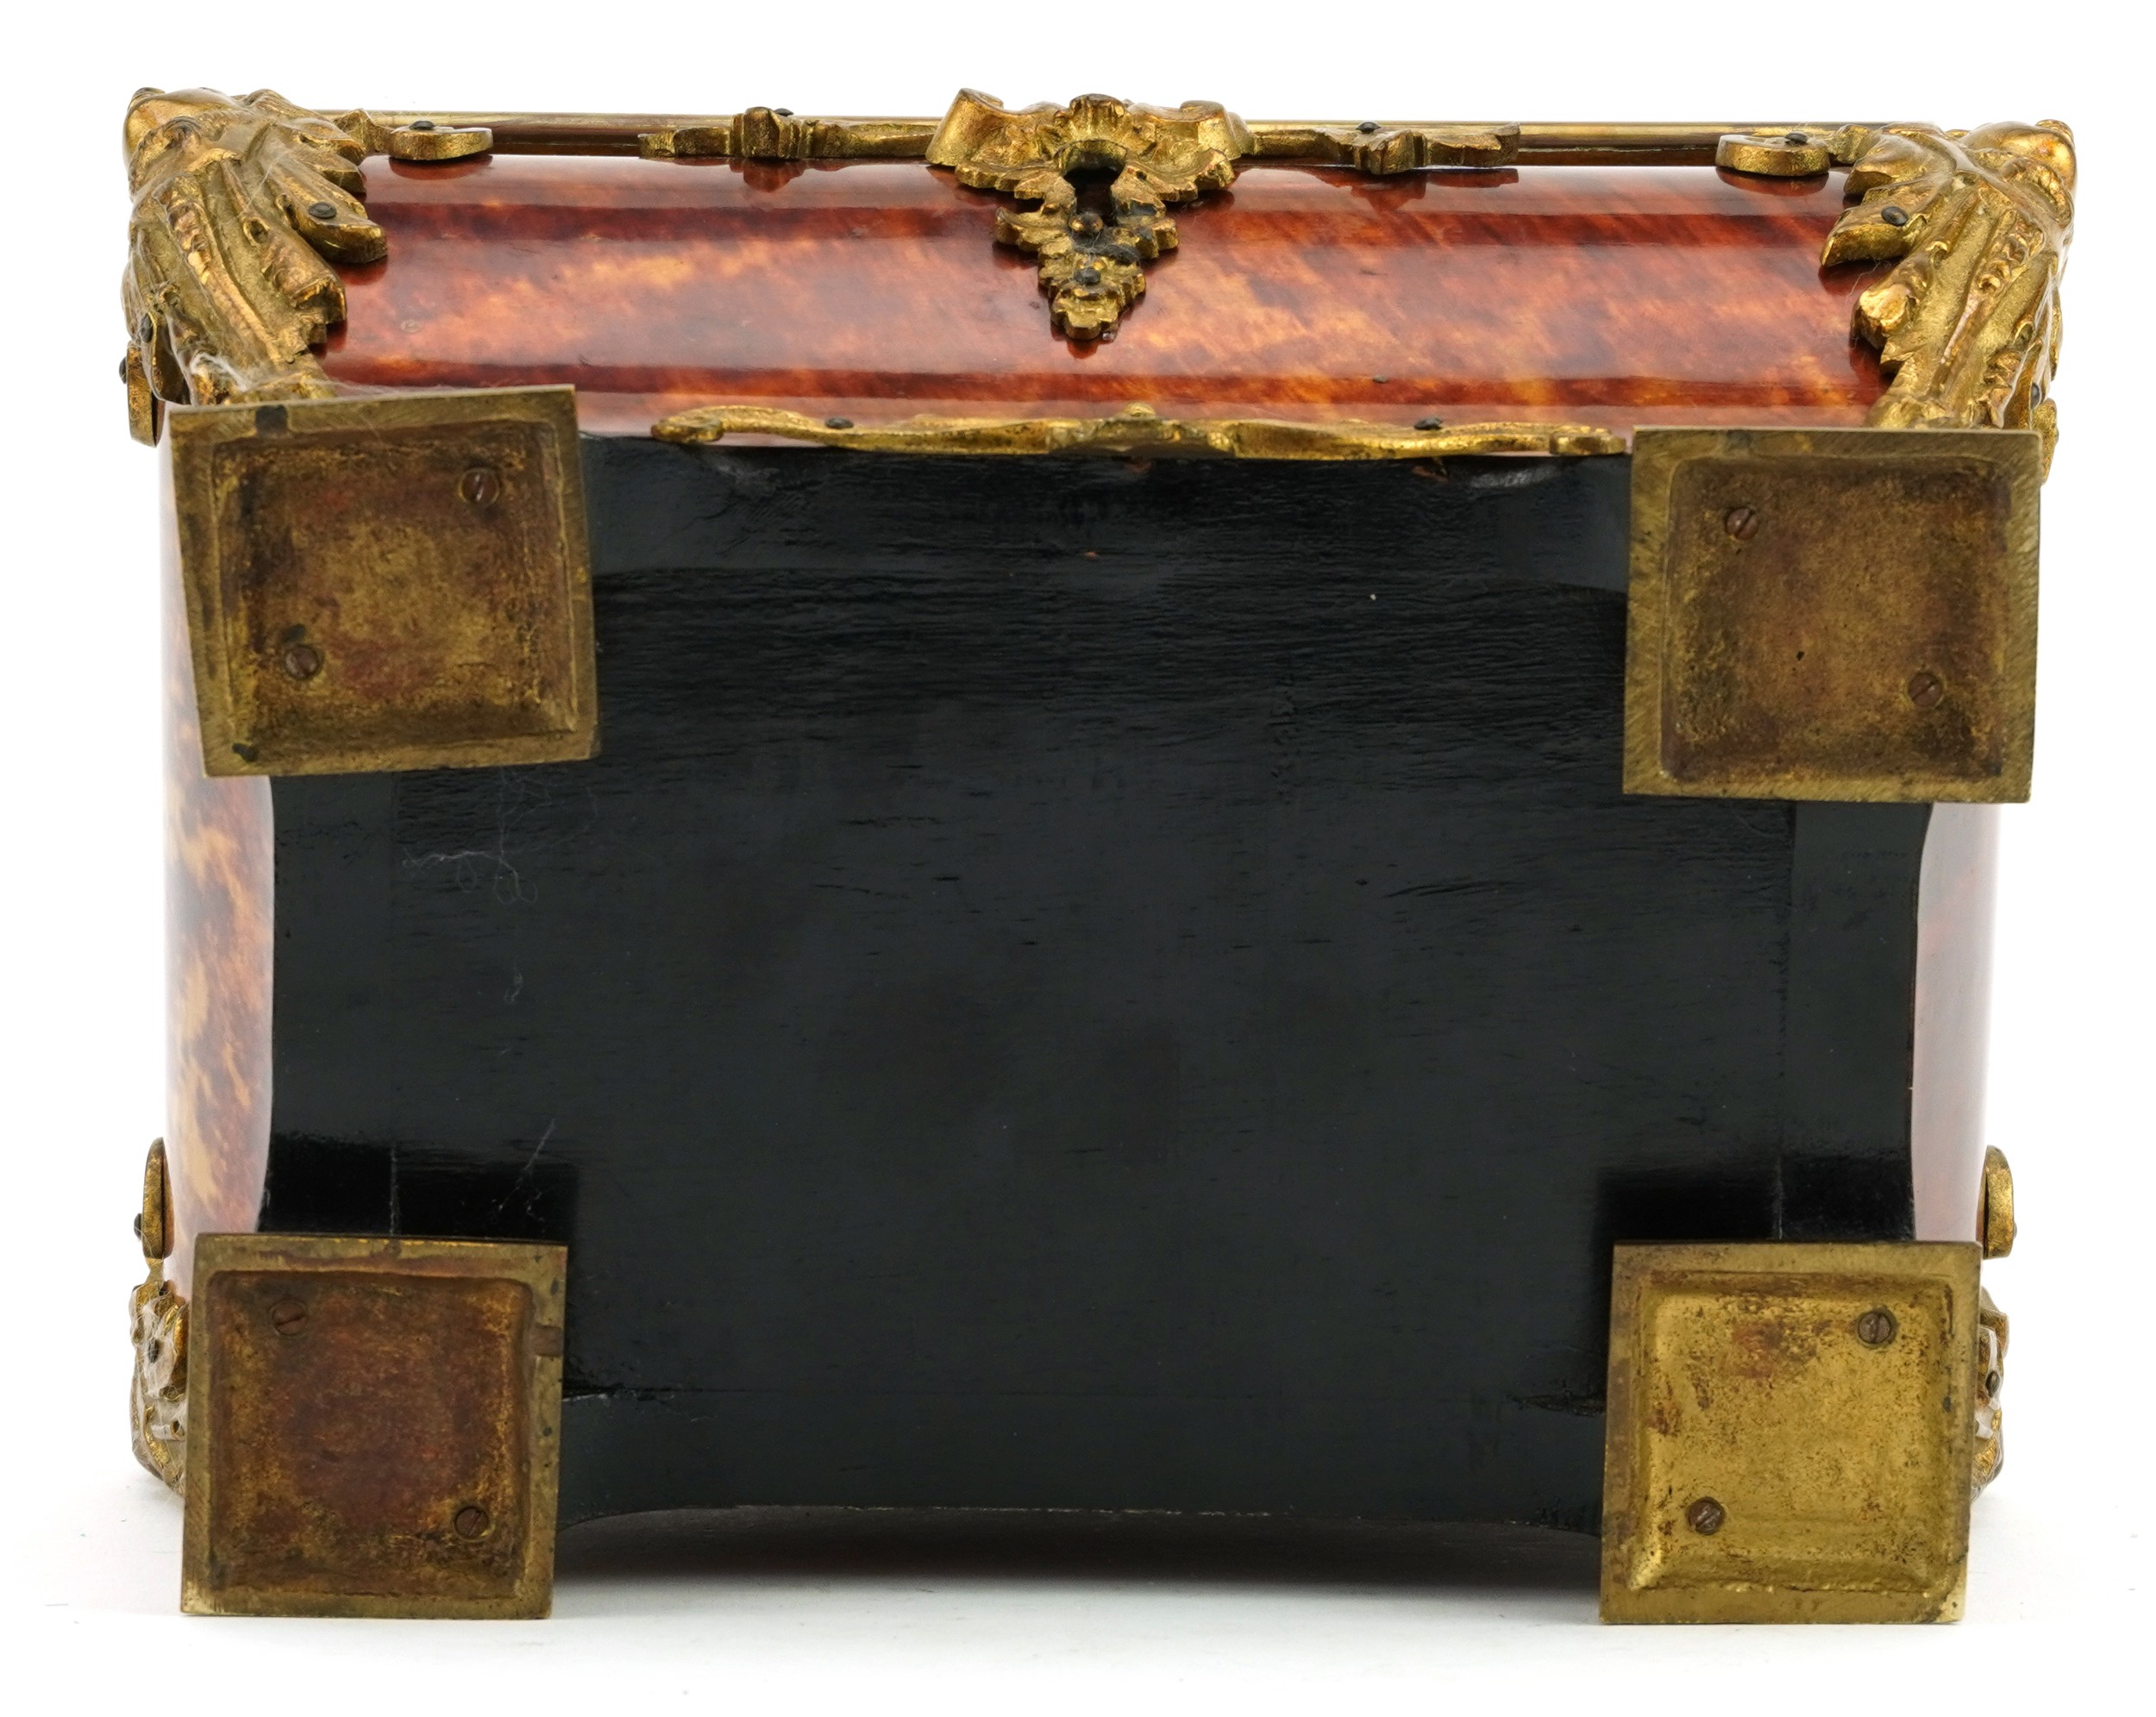 French Napoleon III tortoiseshell coffin casket with ormolu figural and floral mounts, 15cm H x 22cm - Image 4 of 4